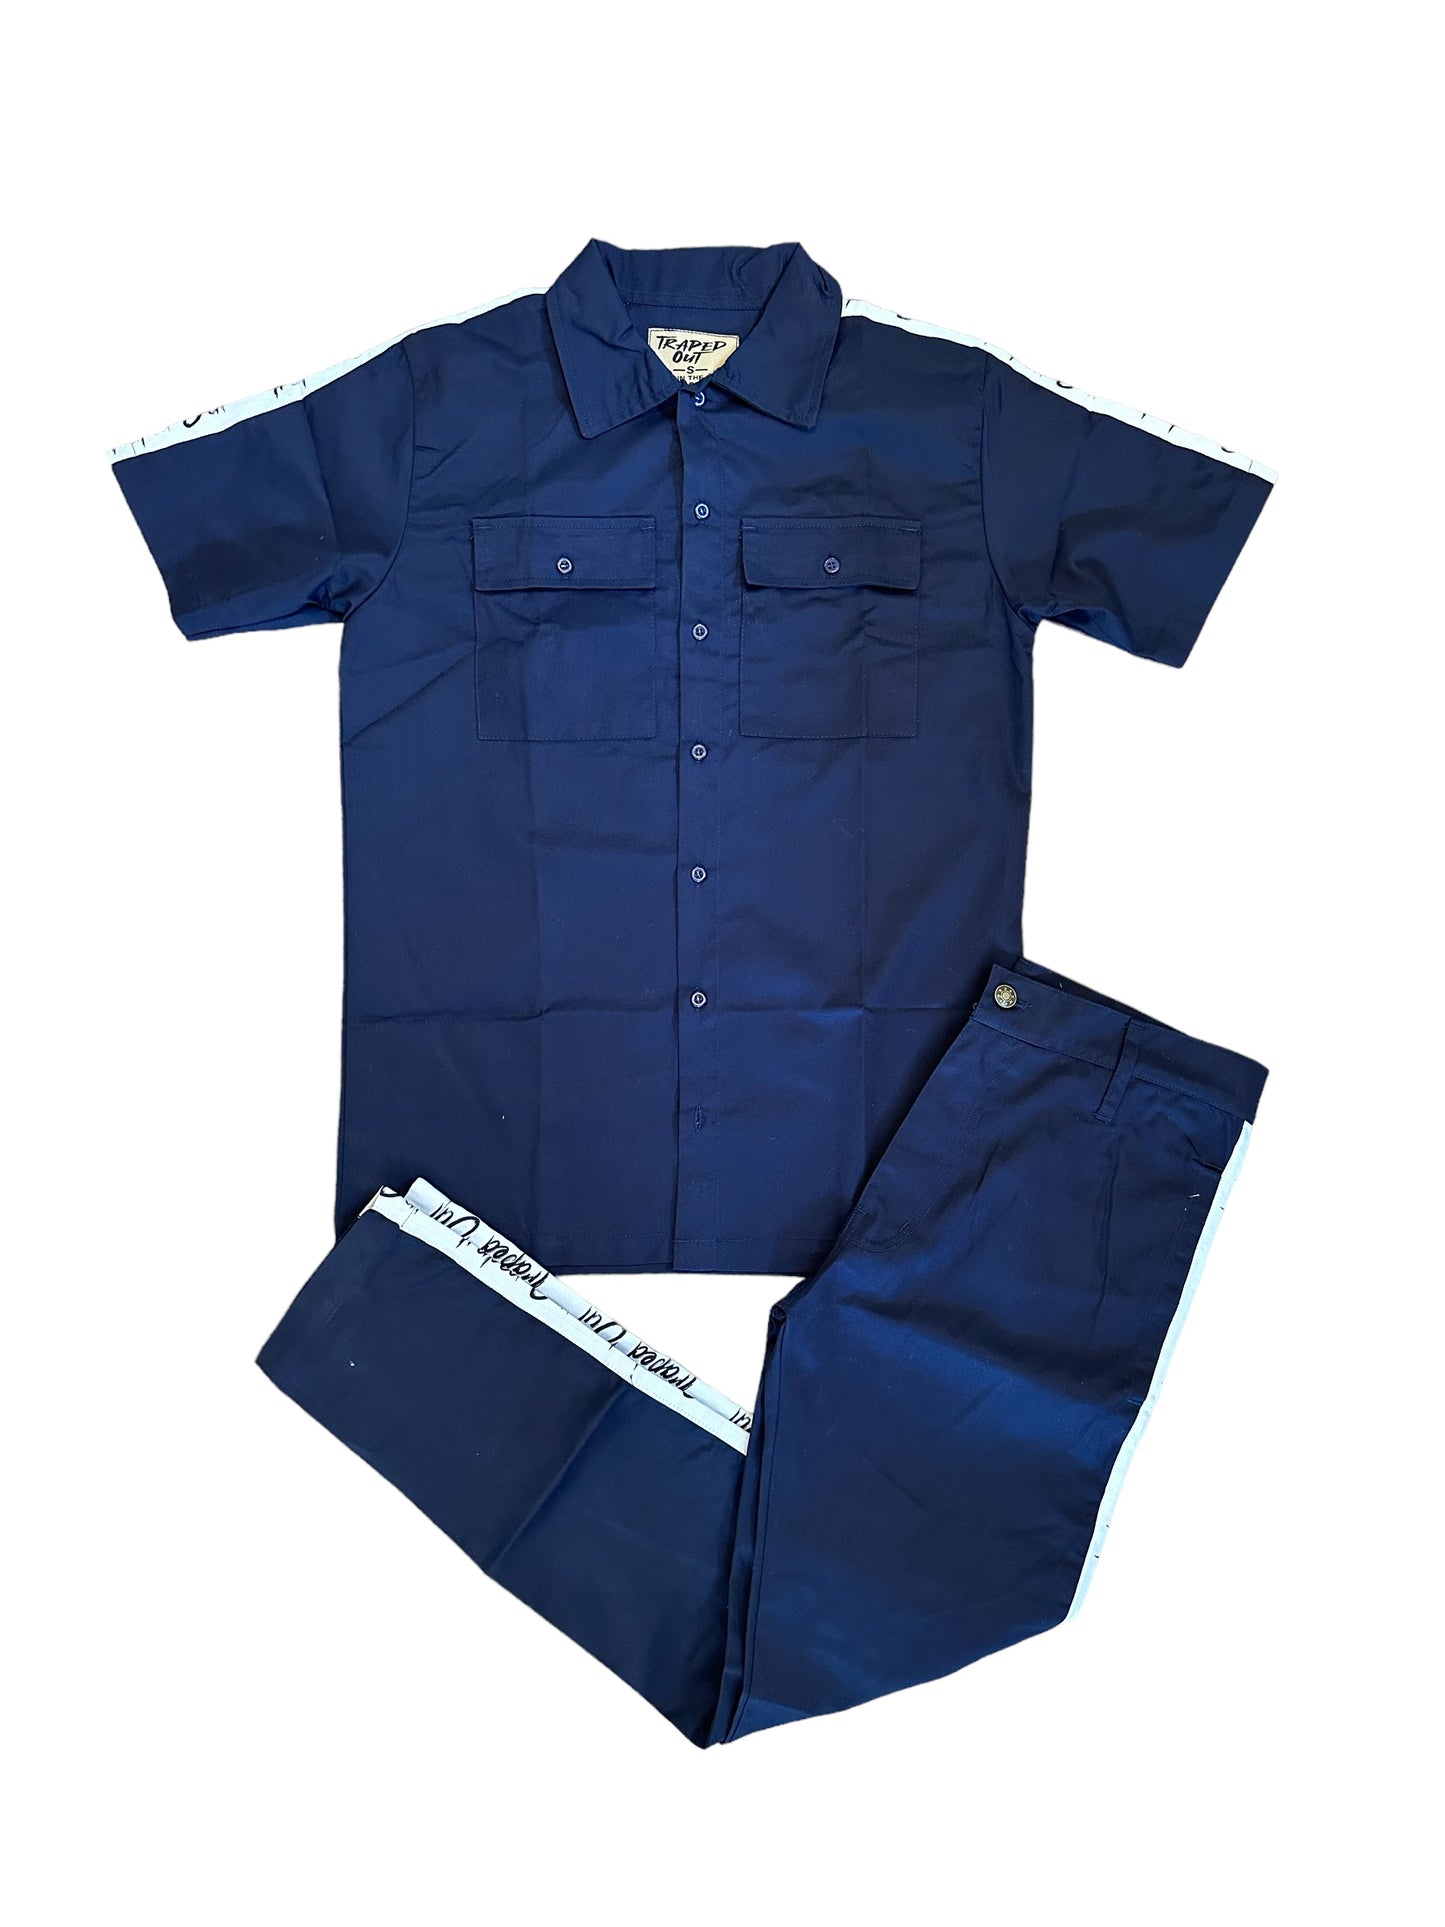 Navy Blue Trapped Out Dickie Shirt